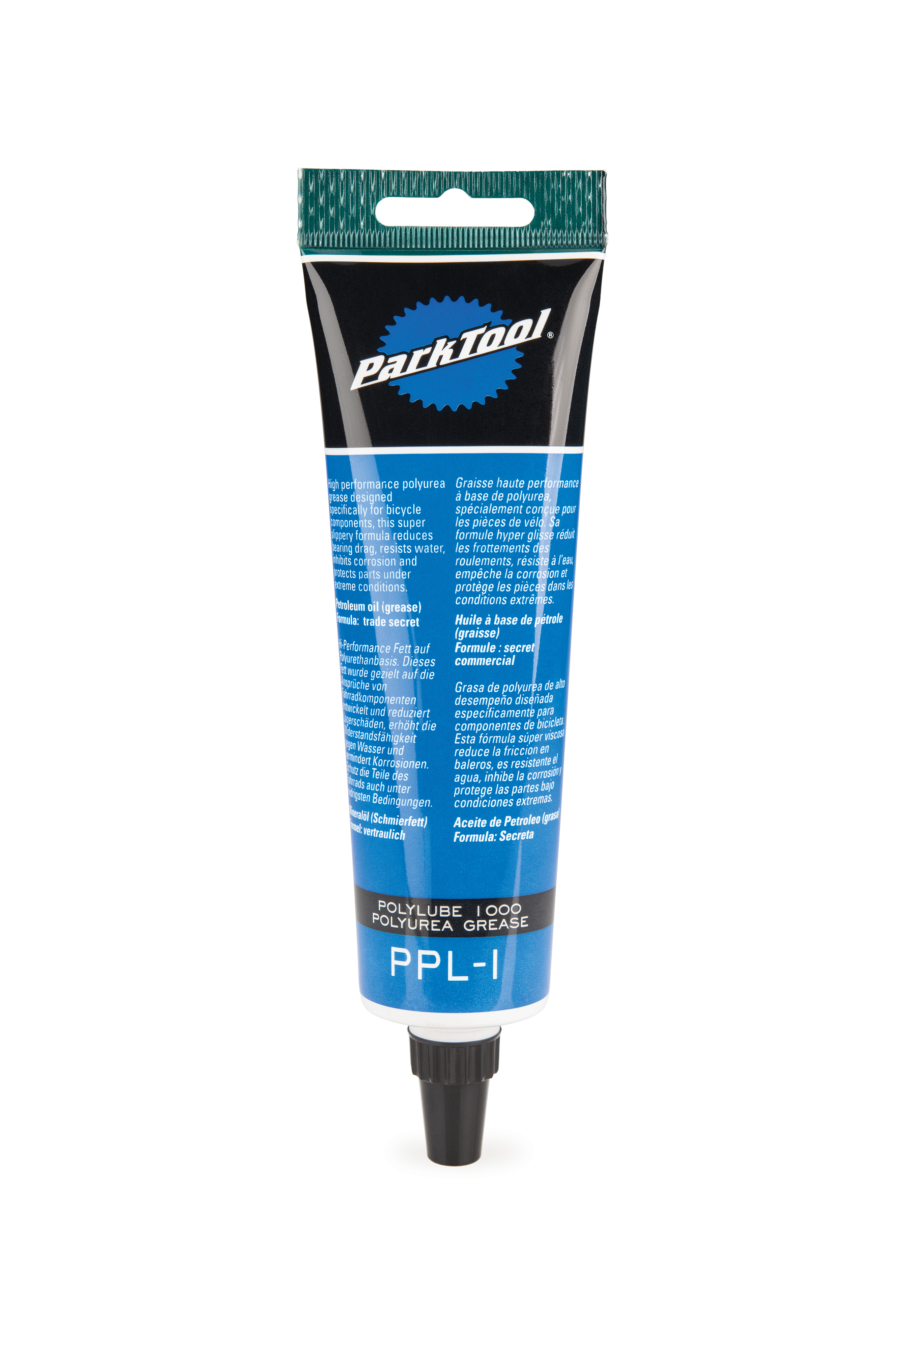 Мастило Park Tool PPL-1 Polylube 1000 Grease 4oz. tube фото 